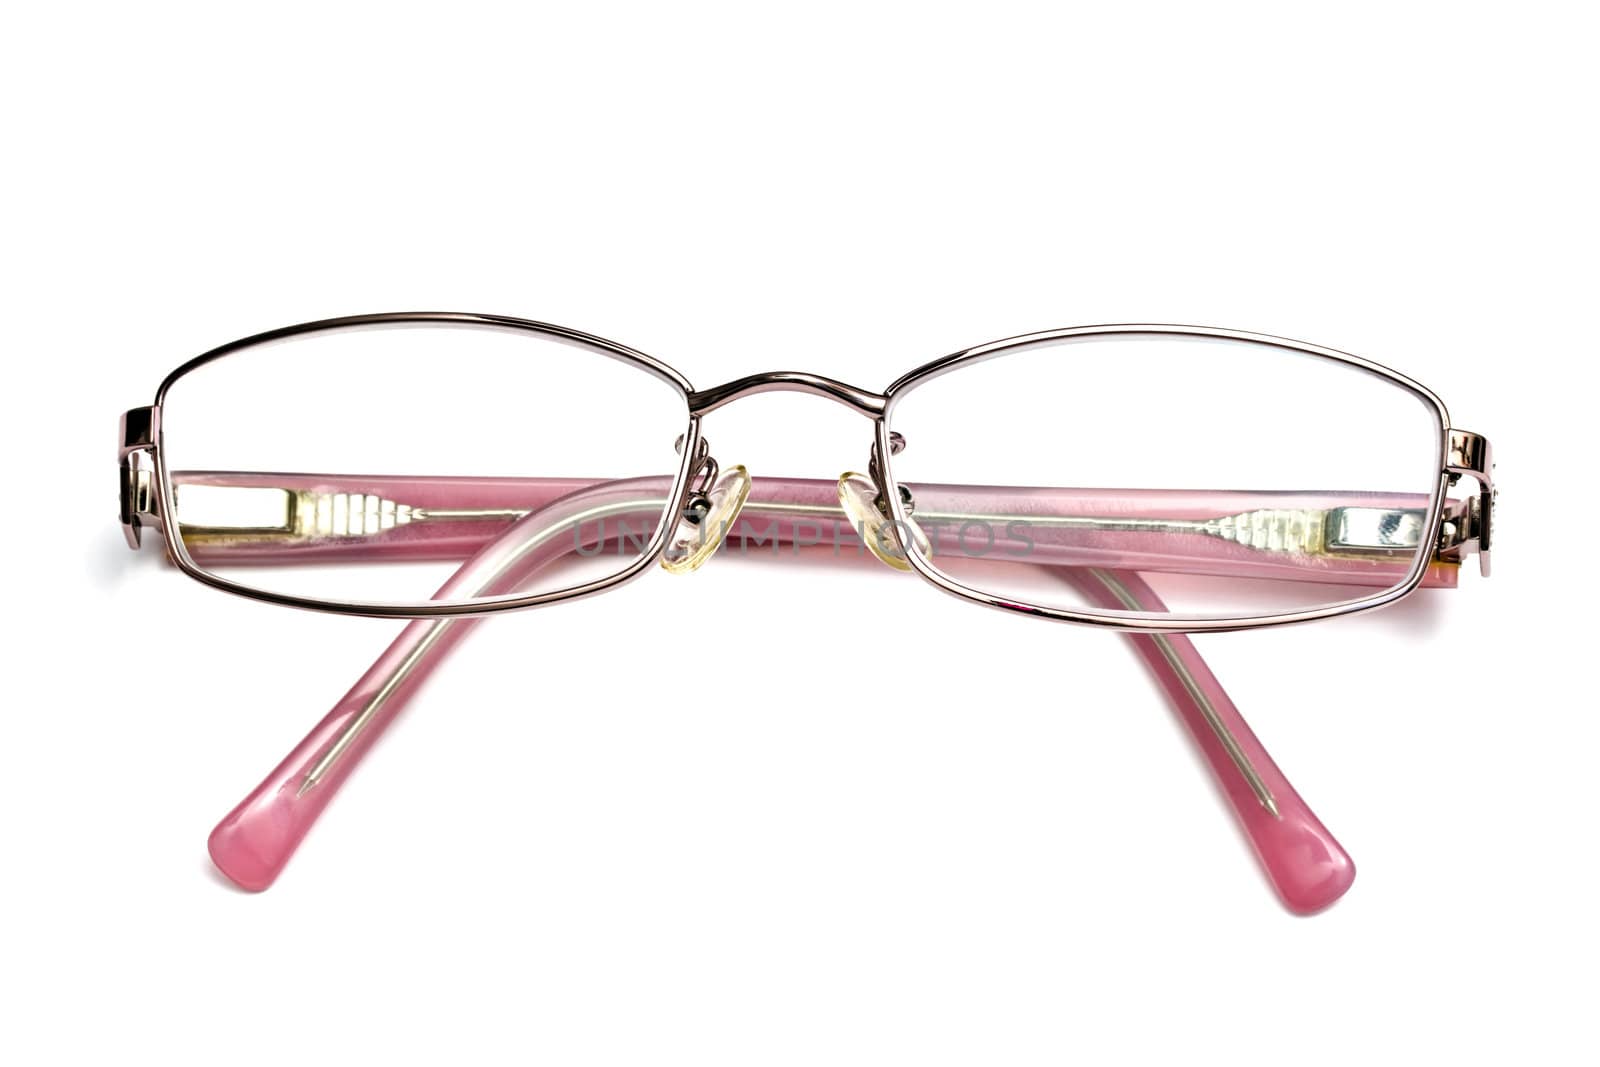 Lady's reading glasses by ibphoto